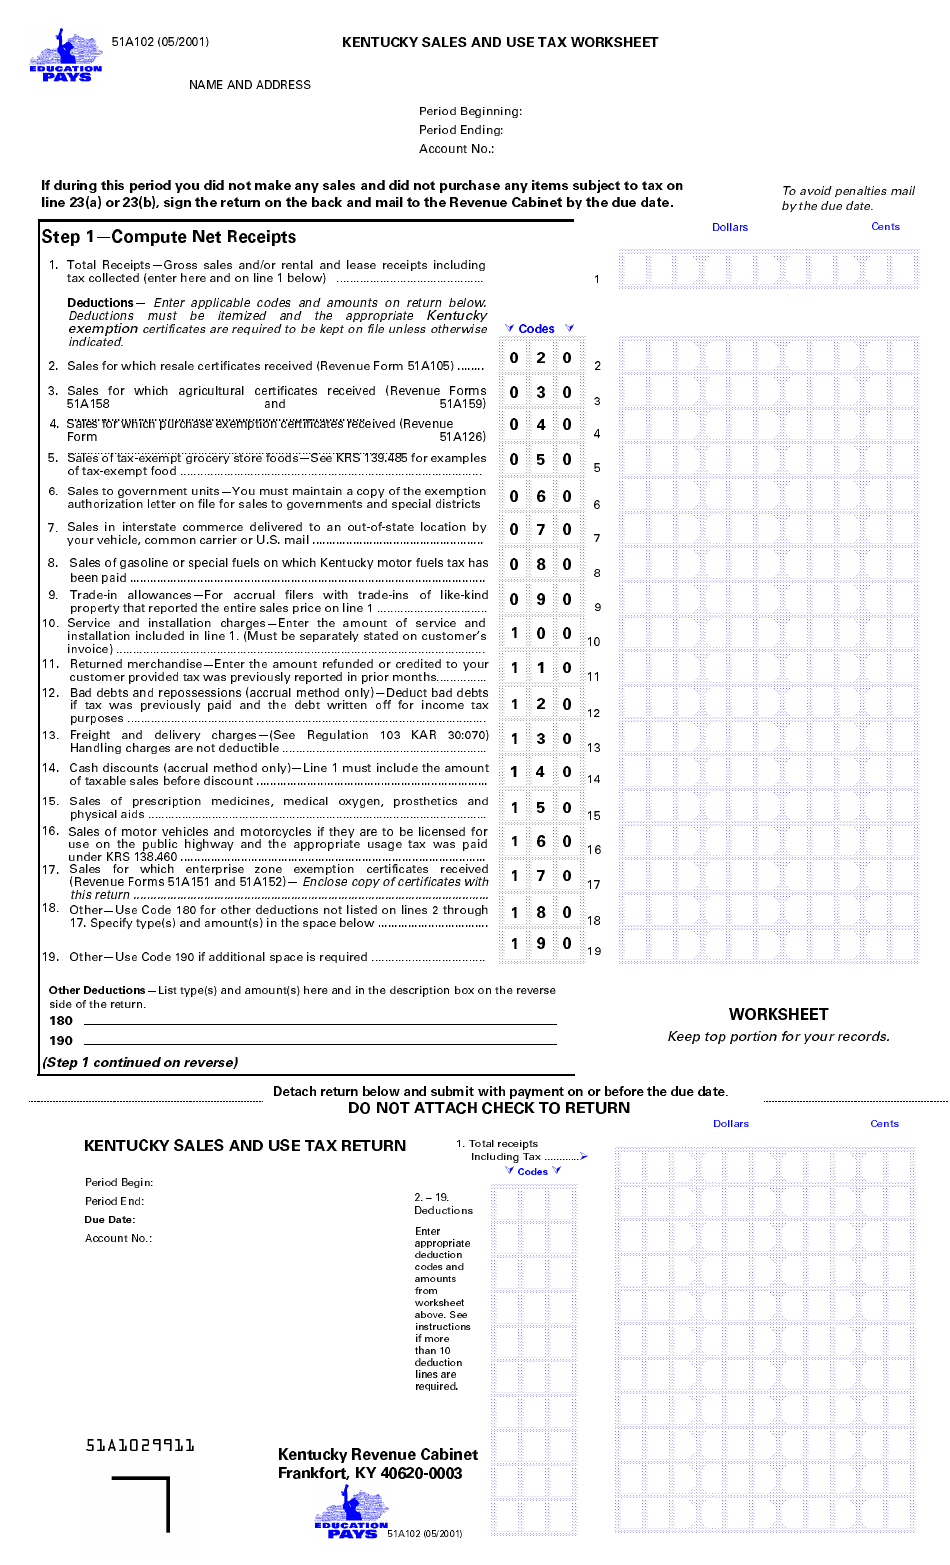 Form 51A102 Sales and Use Tax Worksheet - Kentucky, Page 1